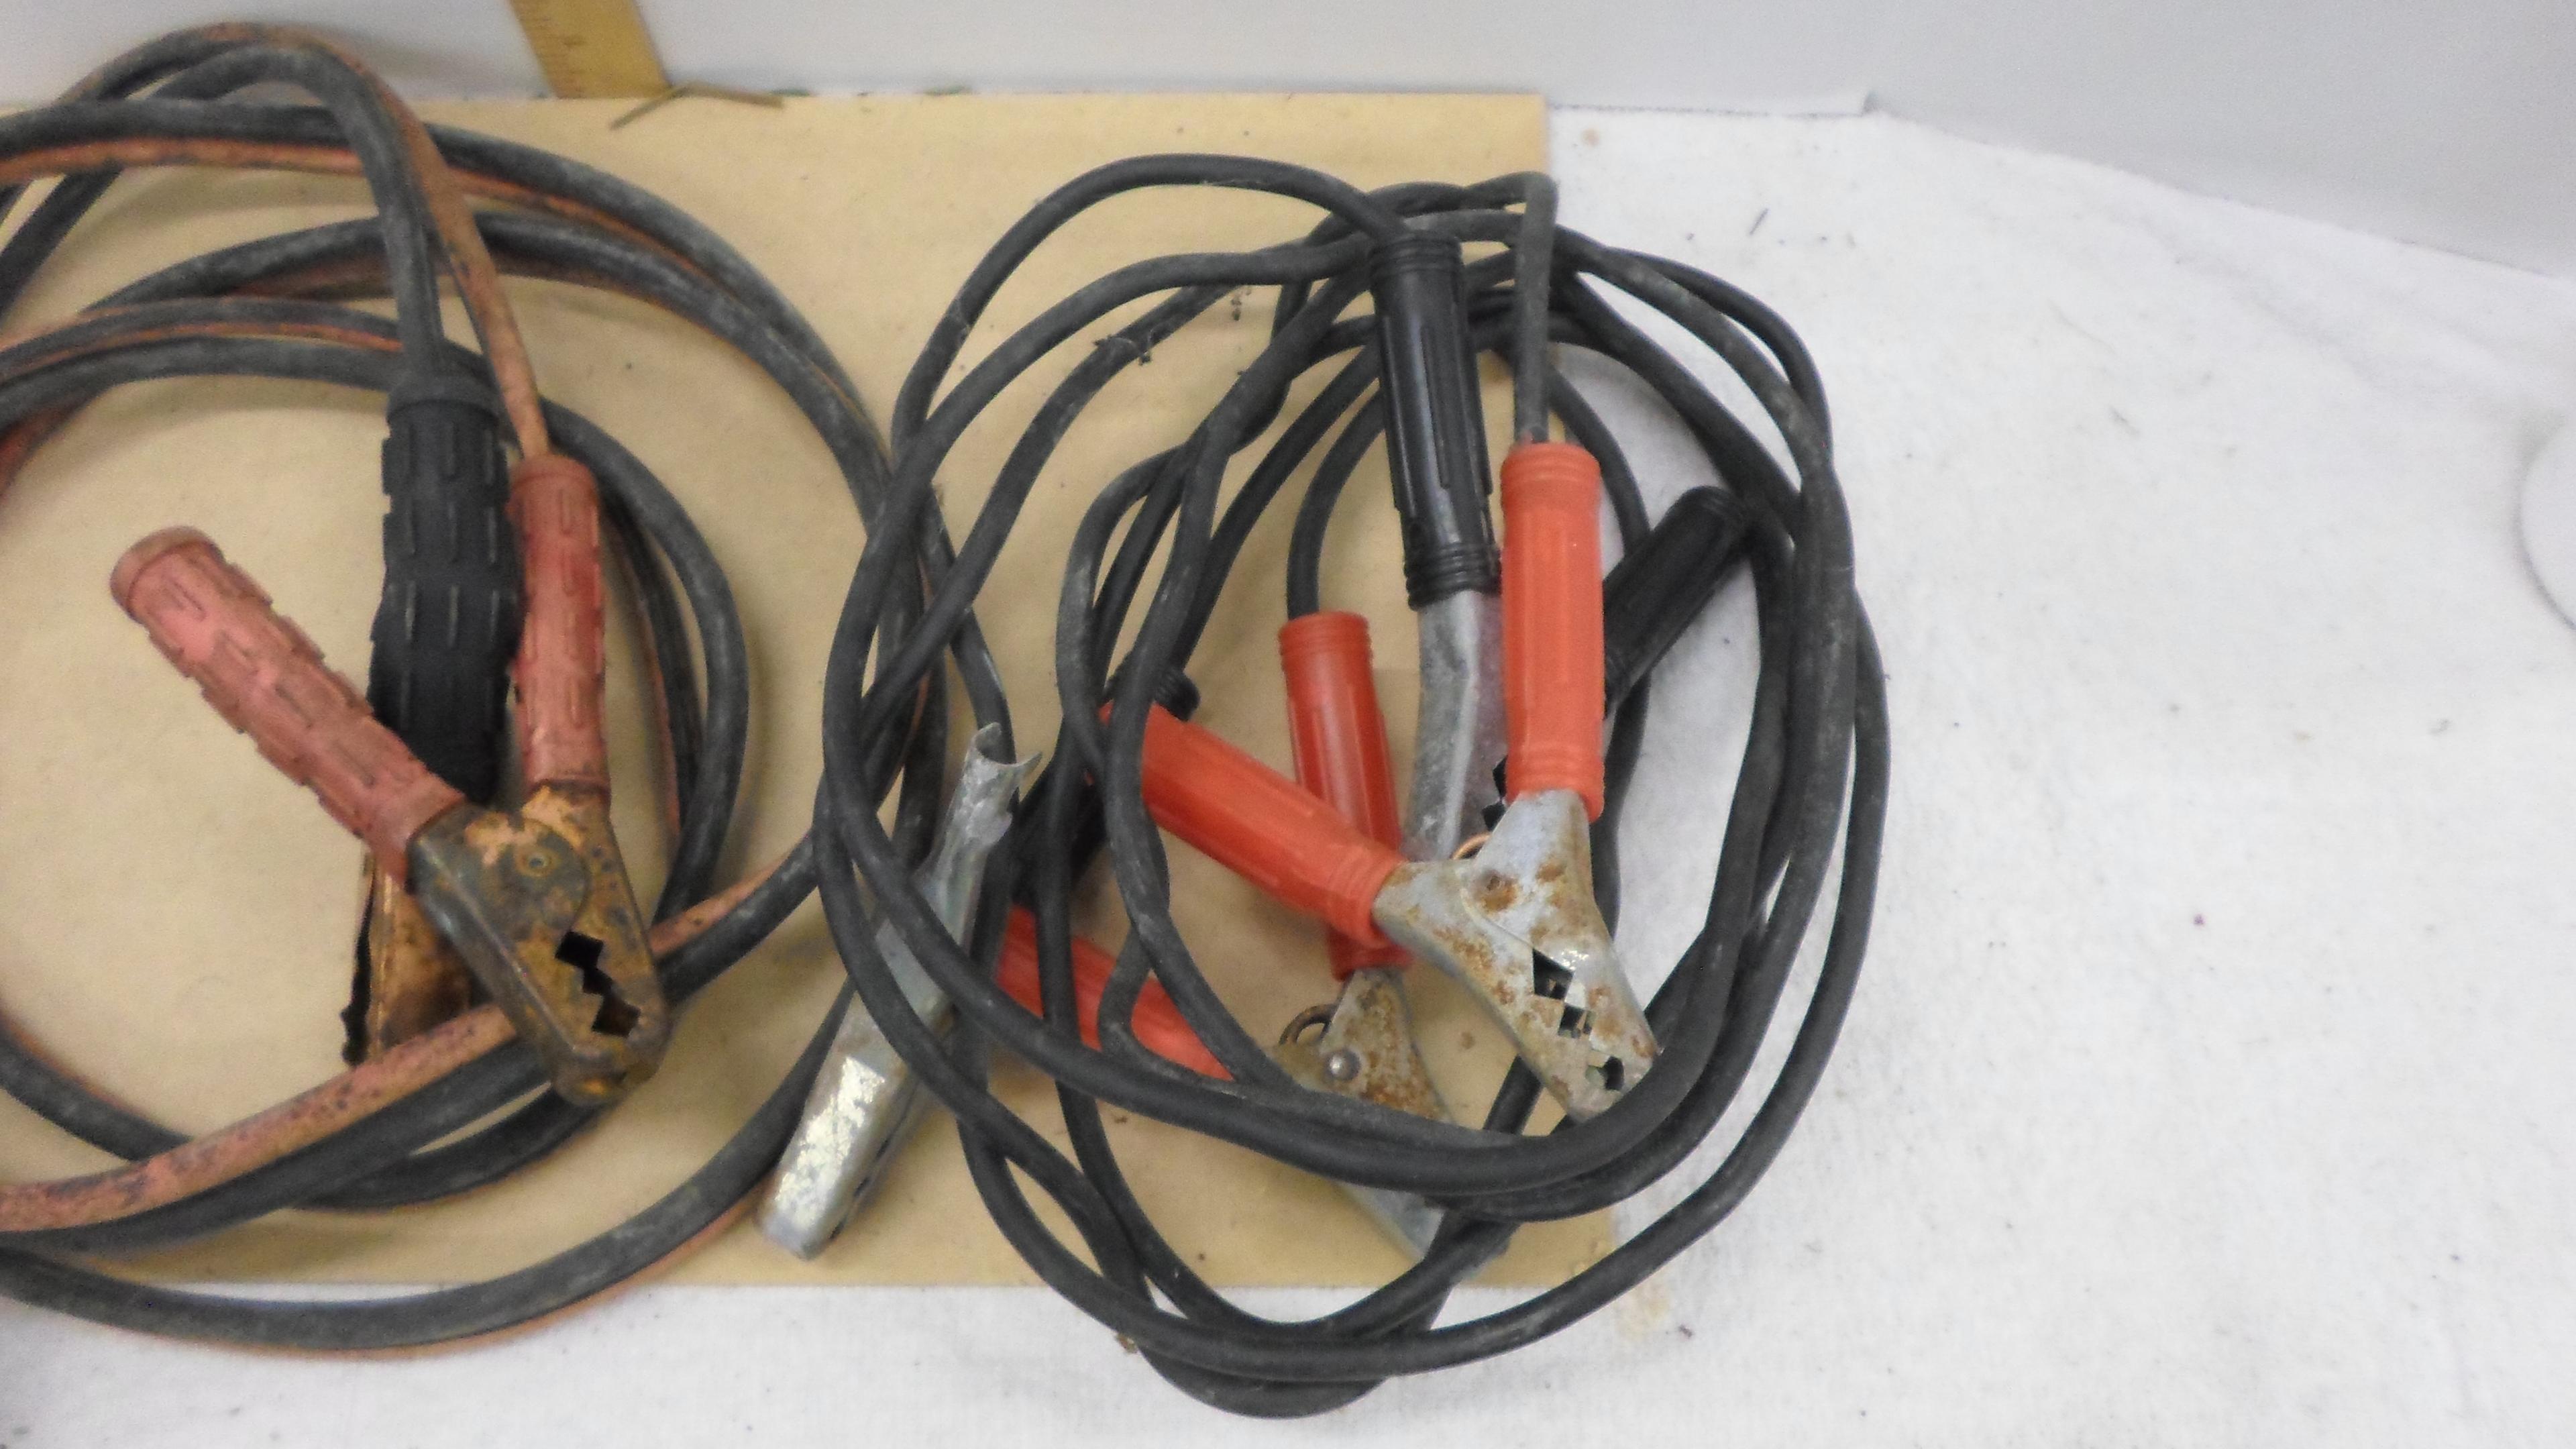 jumper cables, lot of two